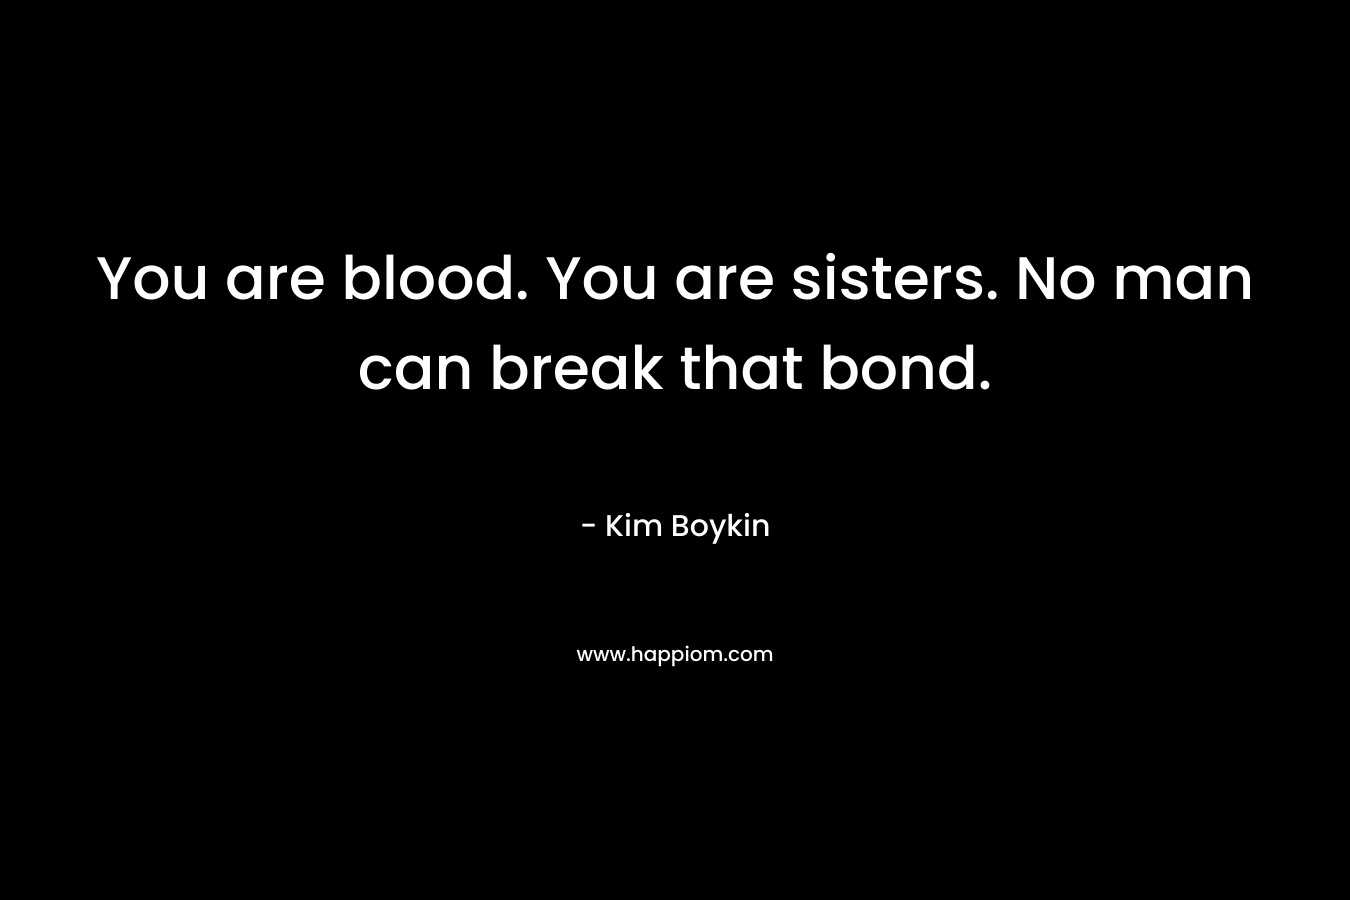 You are blood. You are sisters. No man can break that bond. – Kim Boykin